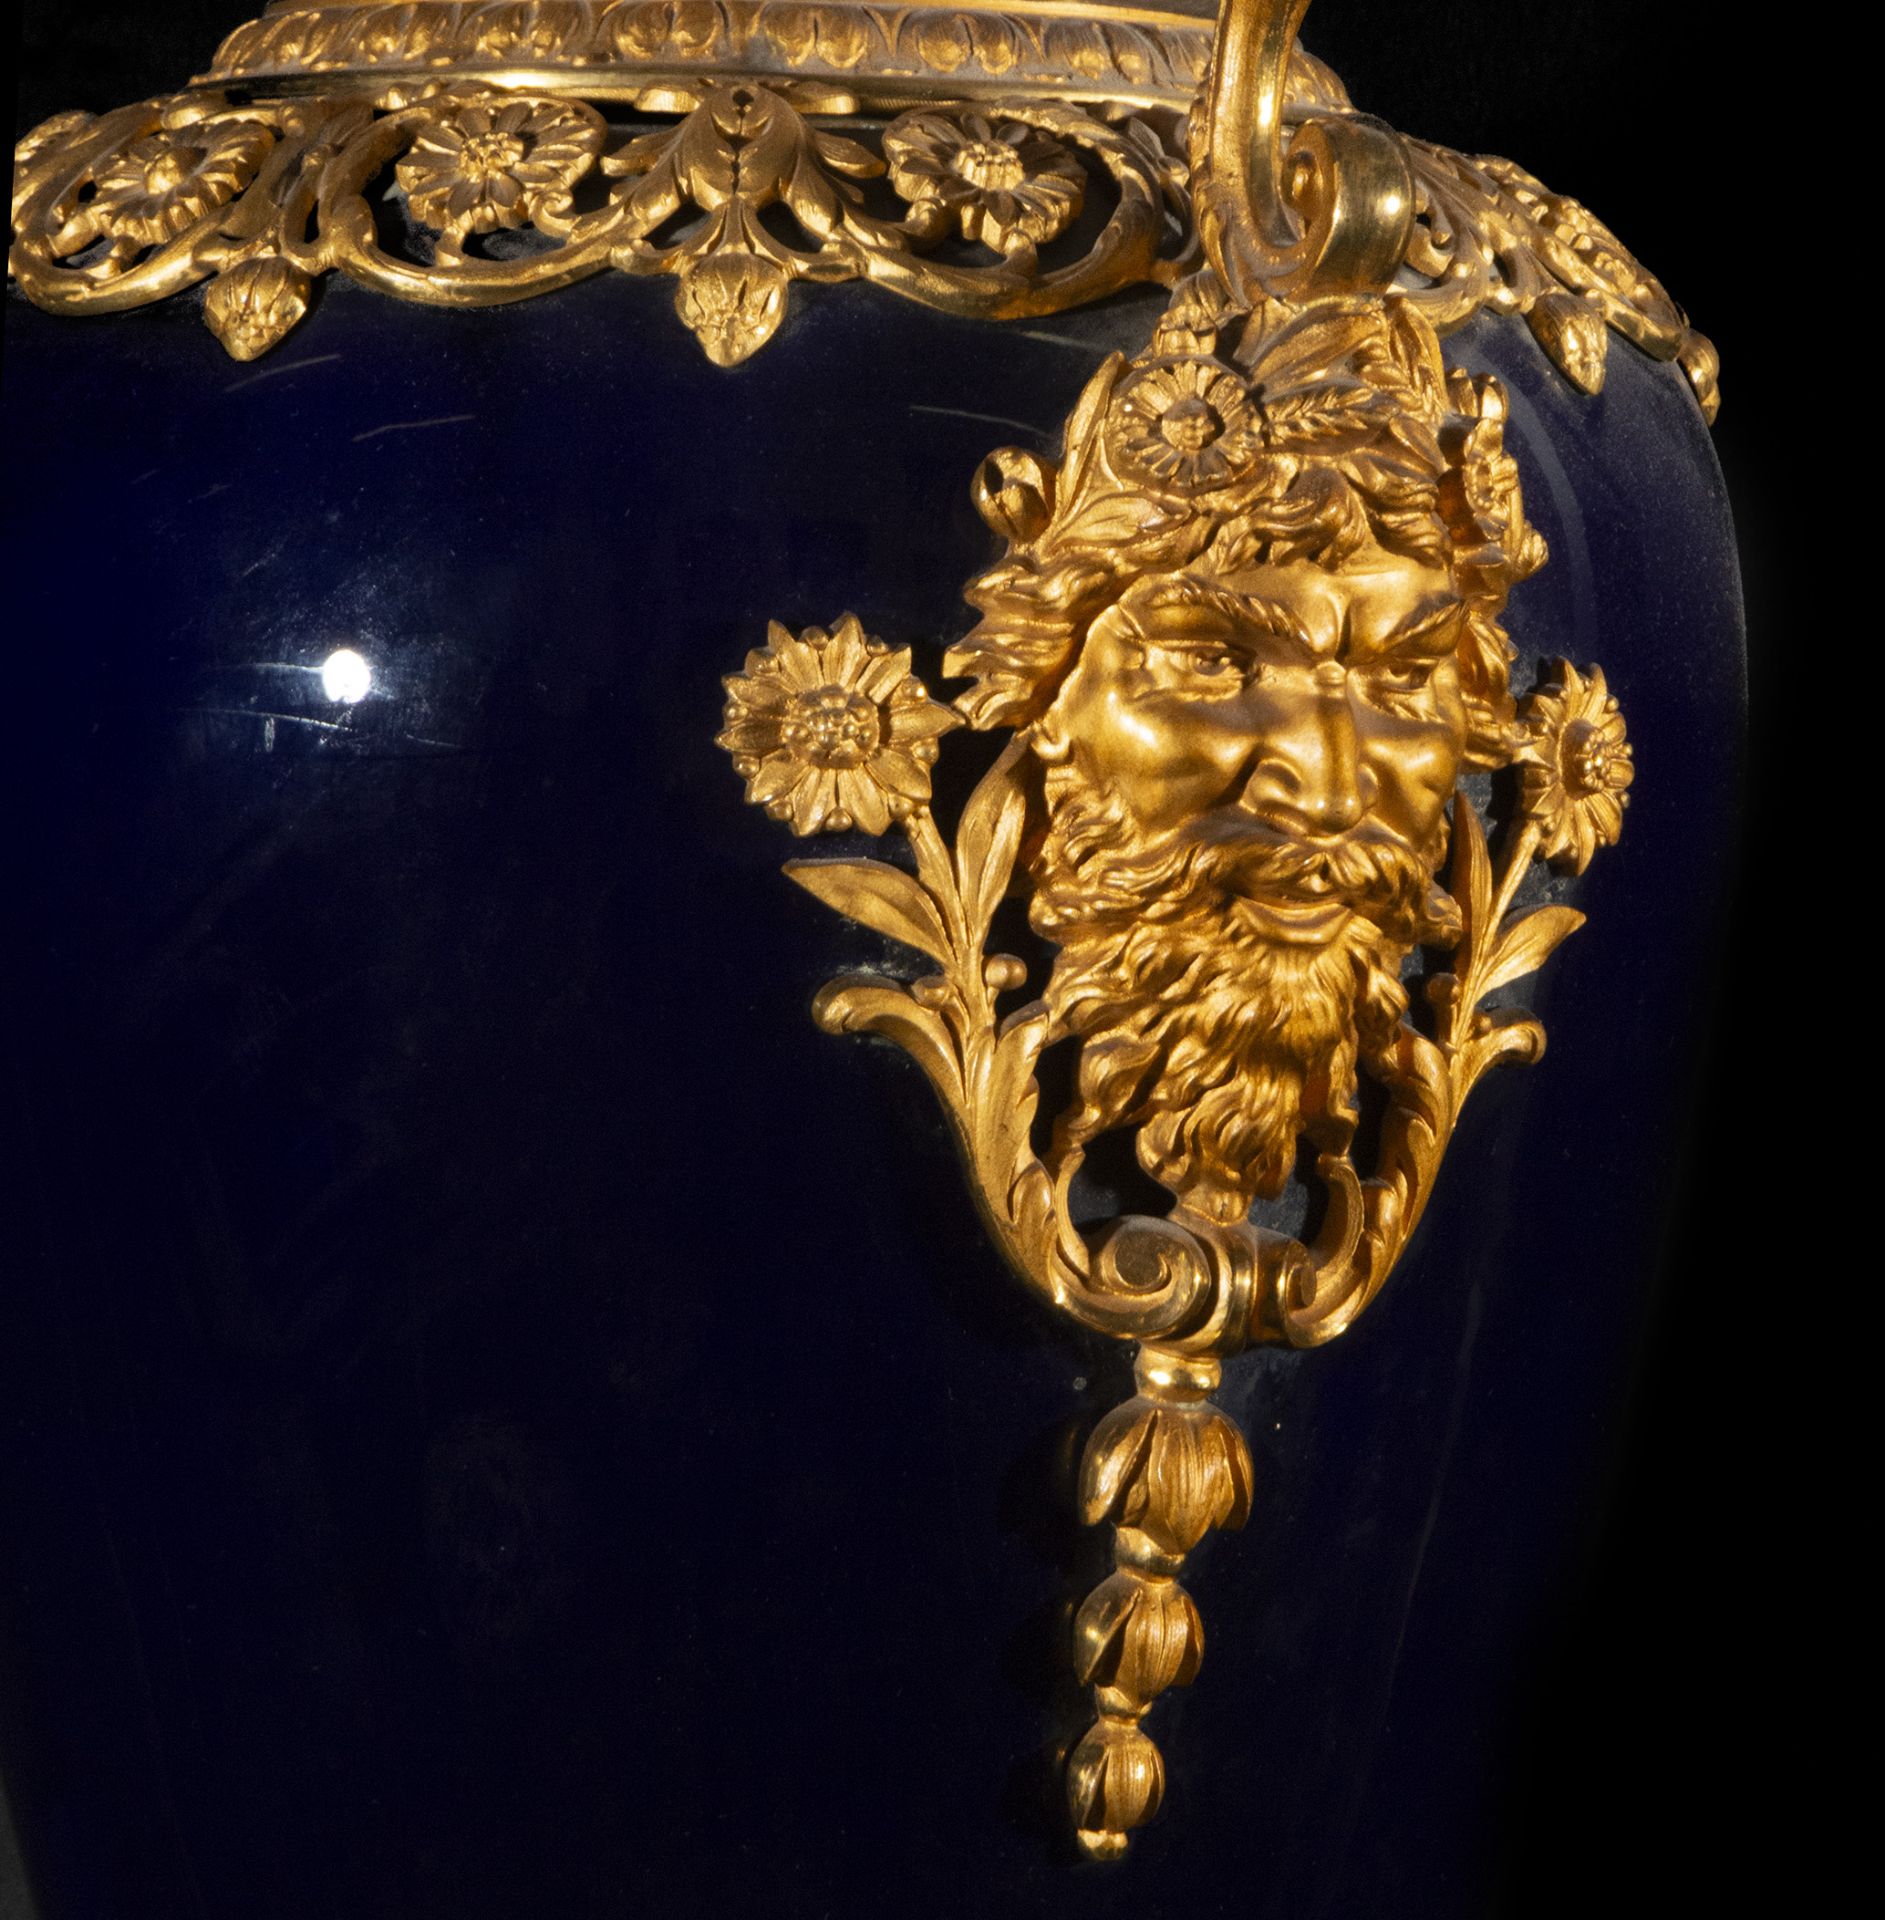 Pair of Large Sevres Vases in "Bleu Celeste" porcelain from the 19th century - Image 8 of 9